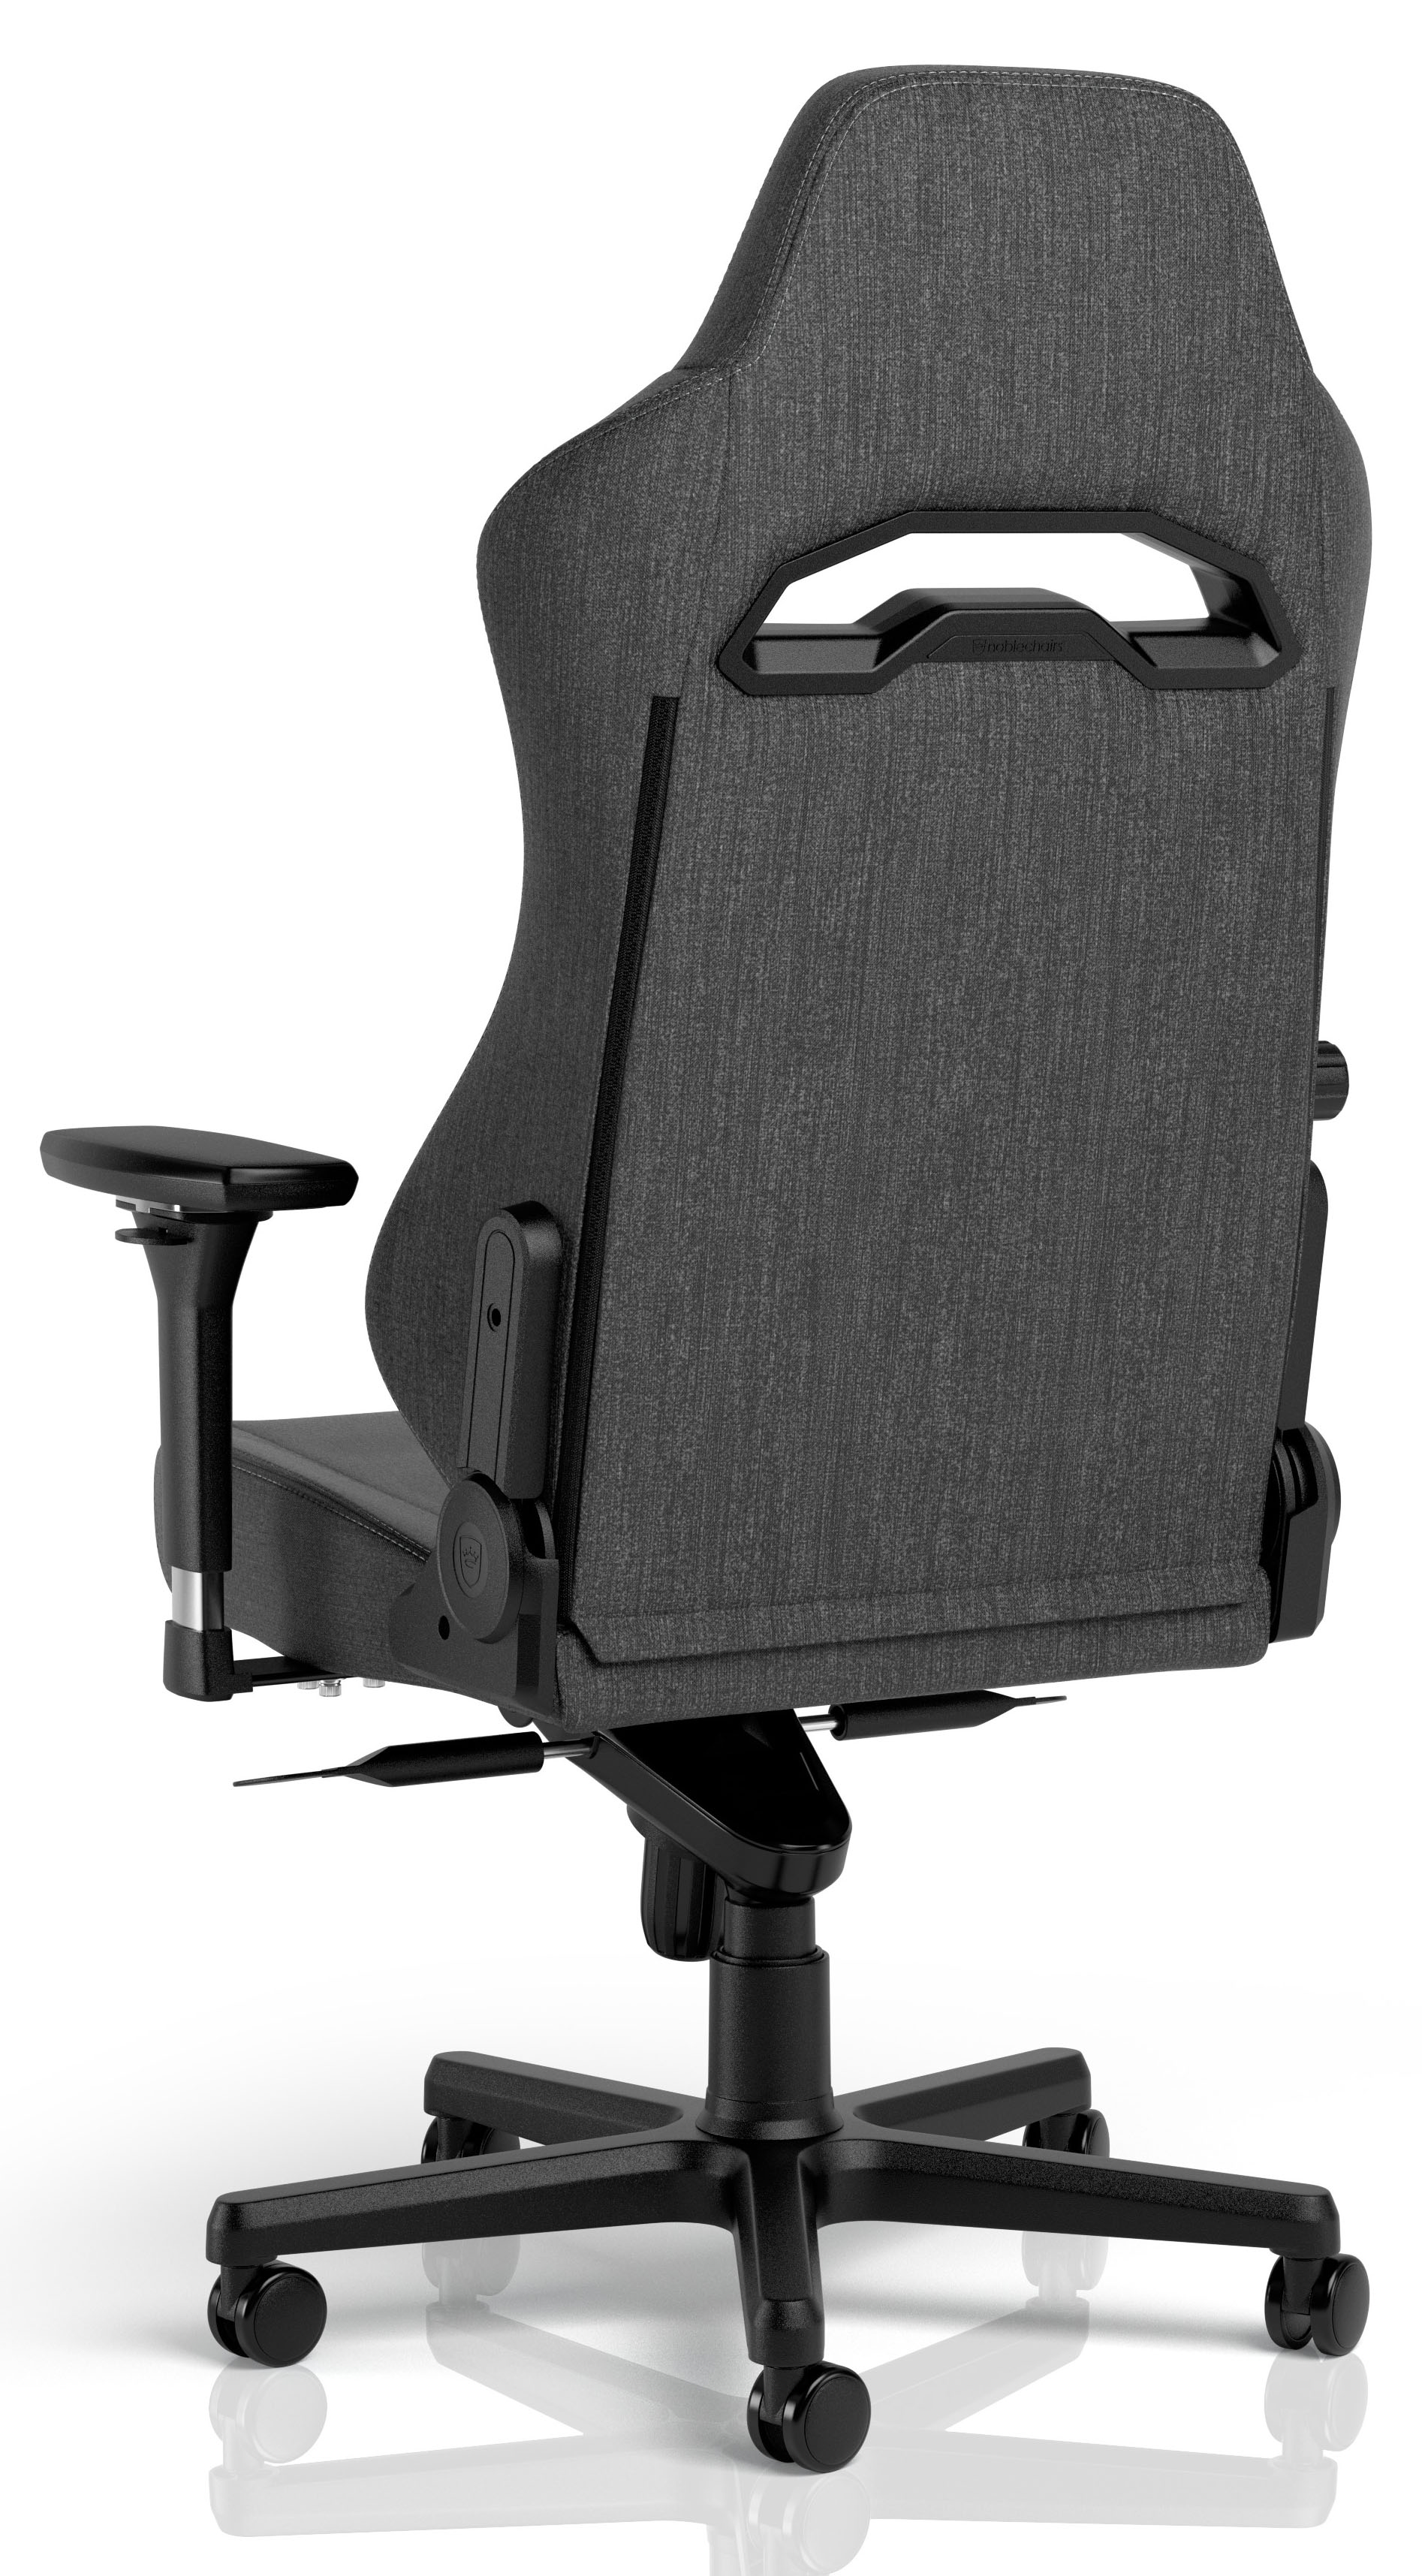 noblechairs - ** B Grade ** Cadeira noblechairs HERO ST TX - Fabric Edition Anthracite